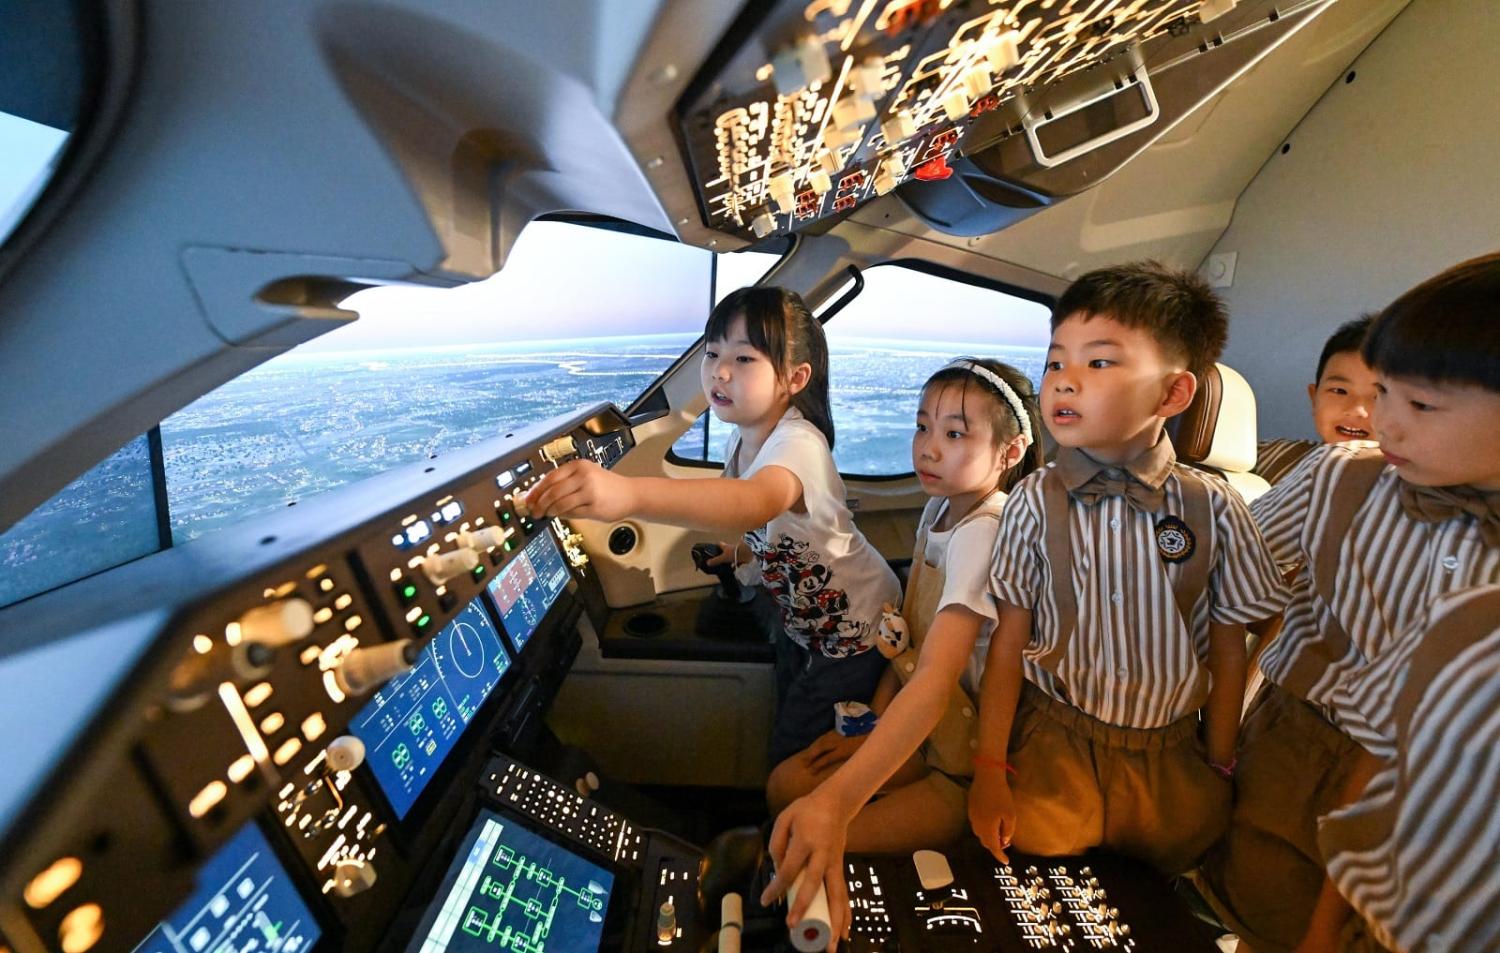 Children experience a flight simulator of the C919 at a science and technology museum in north China's Tianjin, 1 June 2023 (Sun Fanyue/Xinhua via Getty Images)